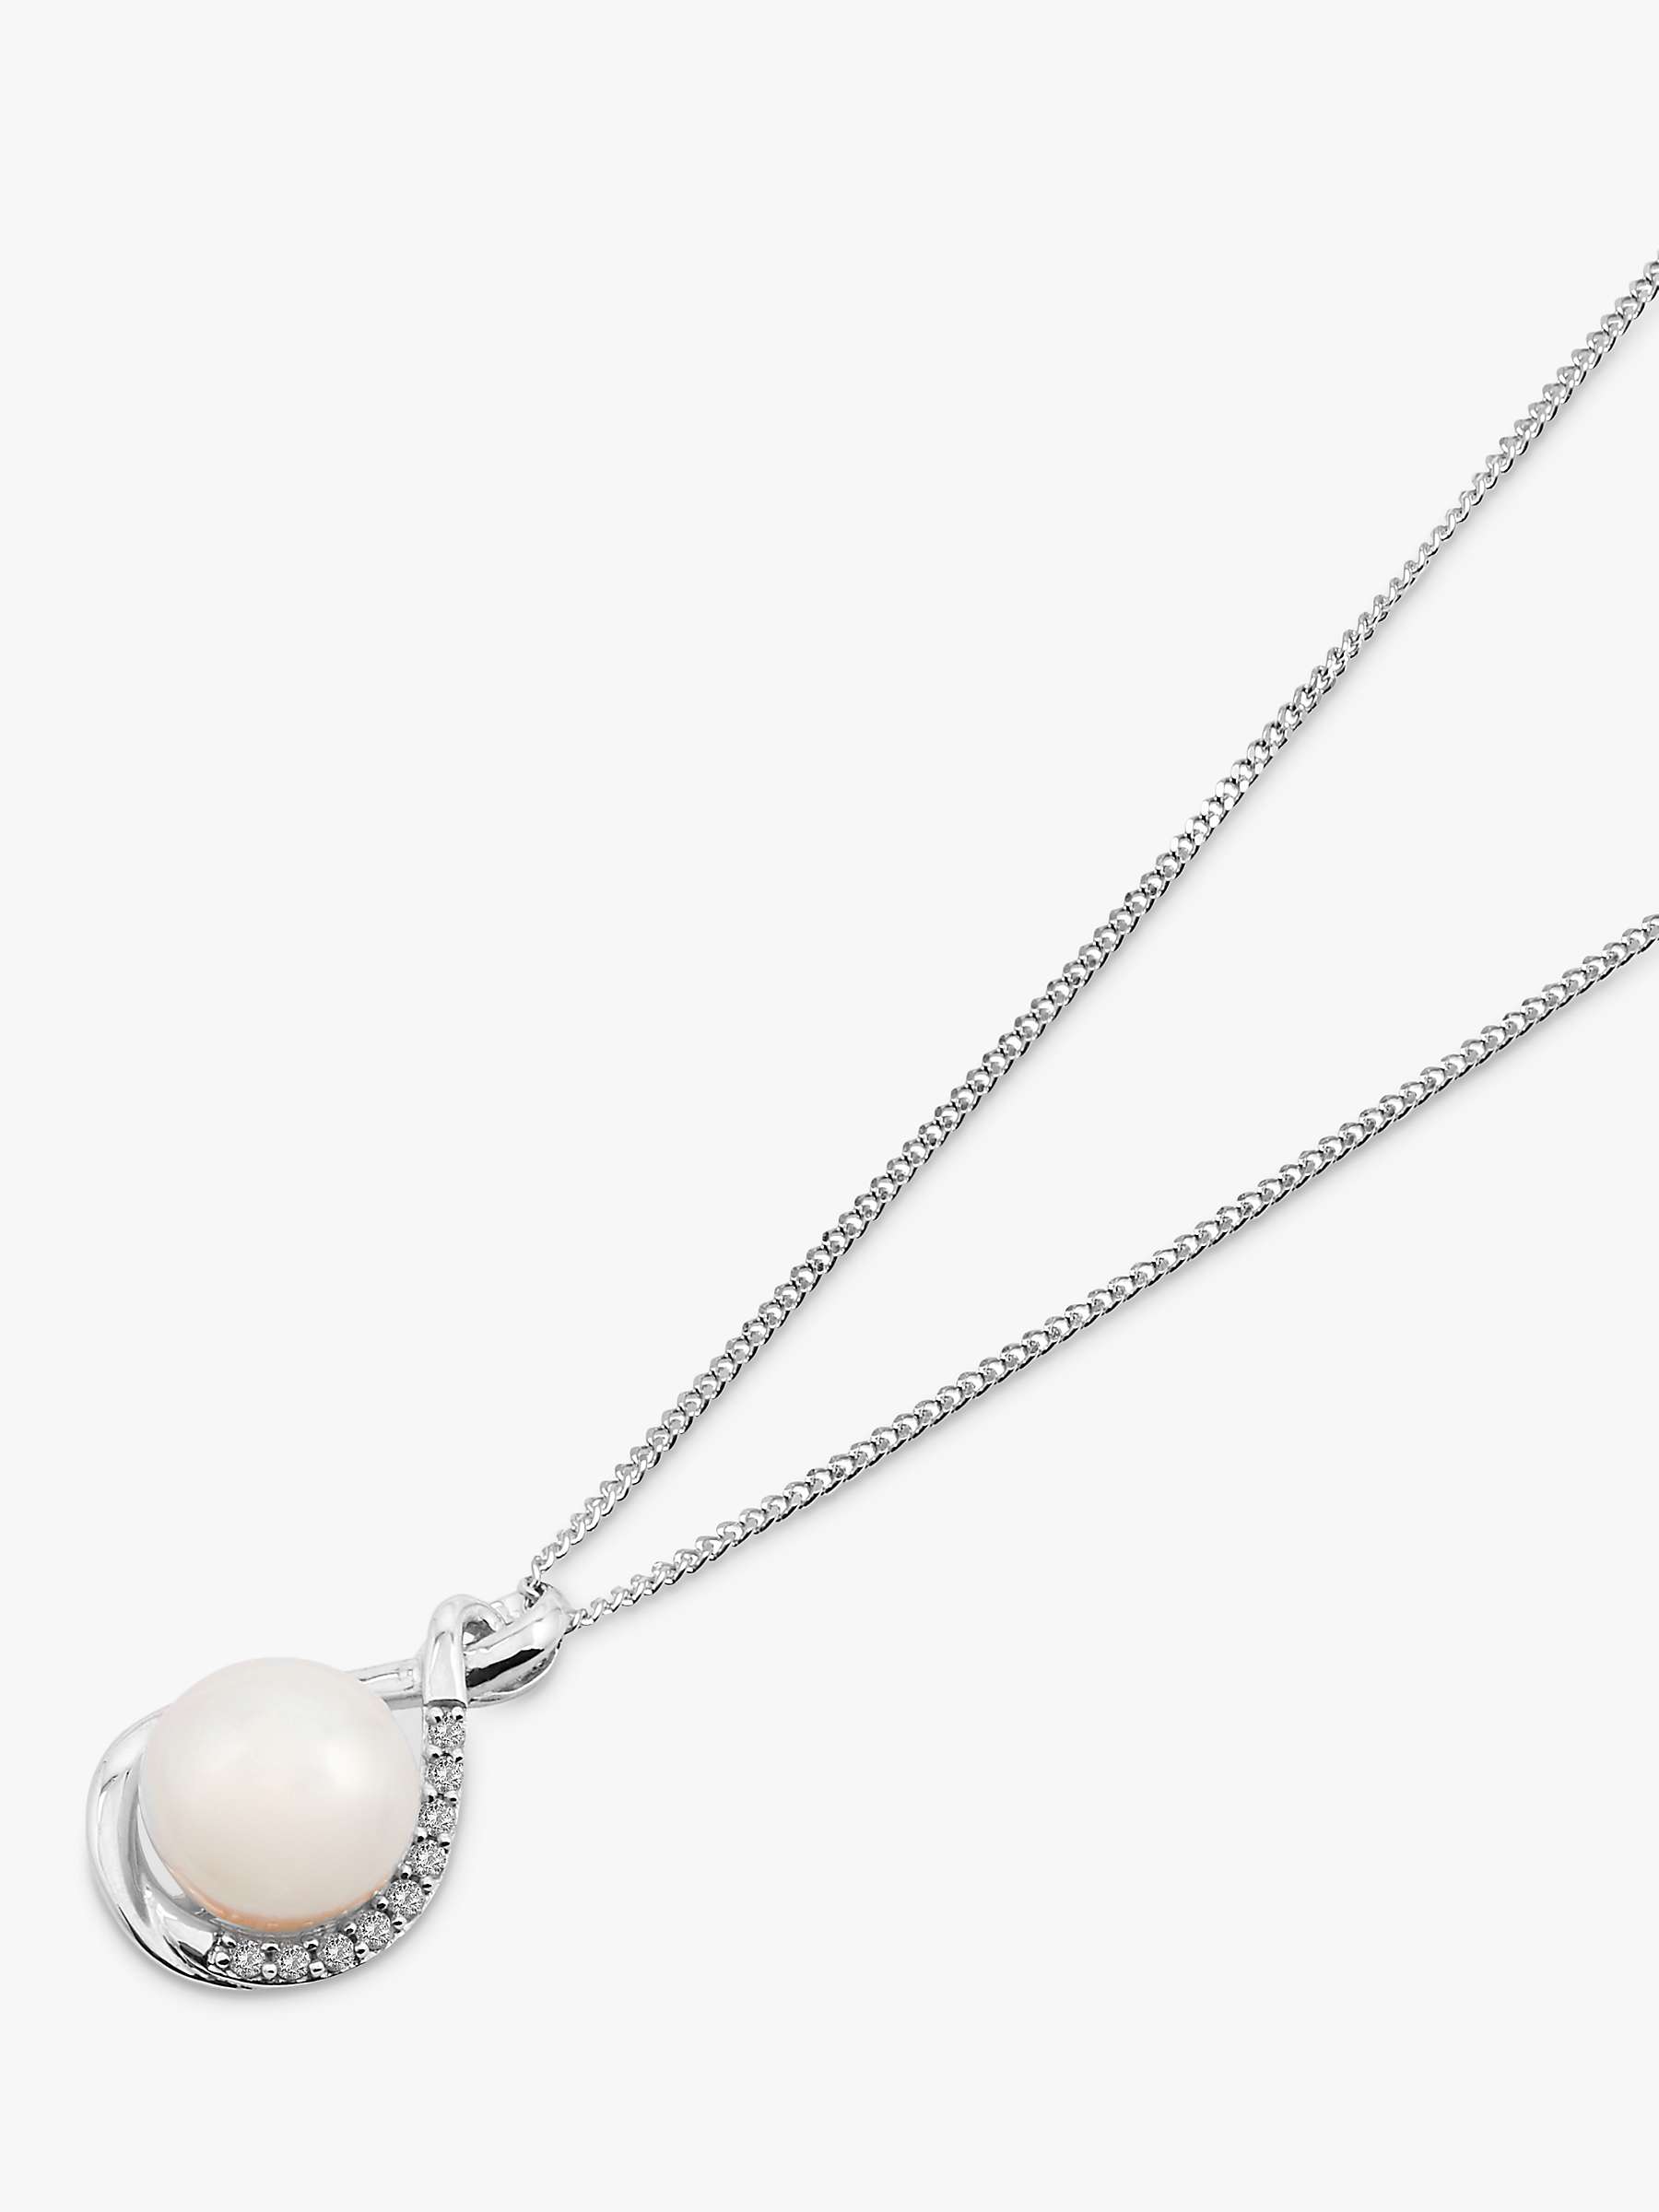 Buy A B Davis 9ct White Gold Freshwater Pearl and Diamond Teardrop Pendant Necklace, Silver/White Online at johnlewis.com